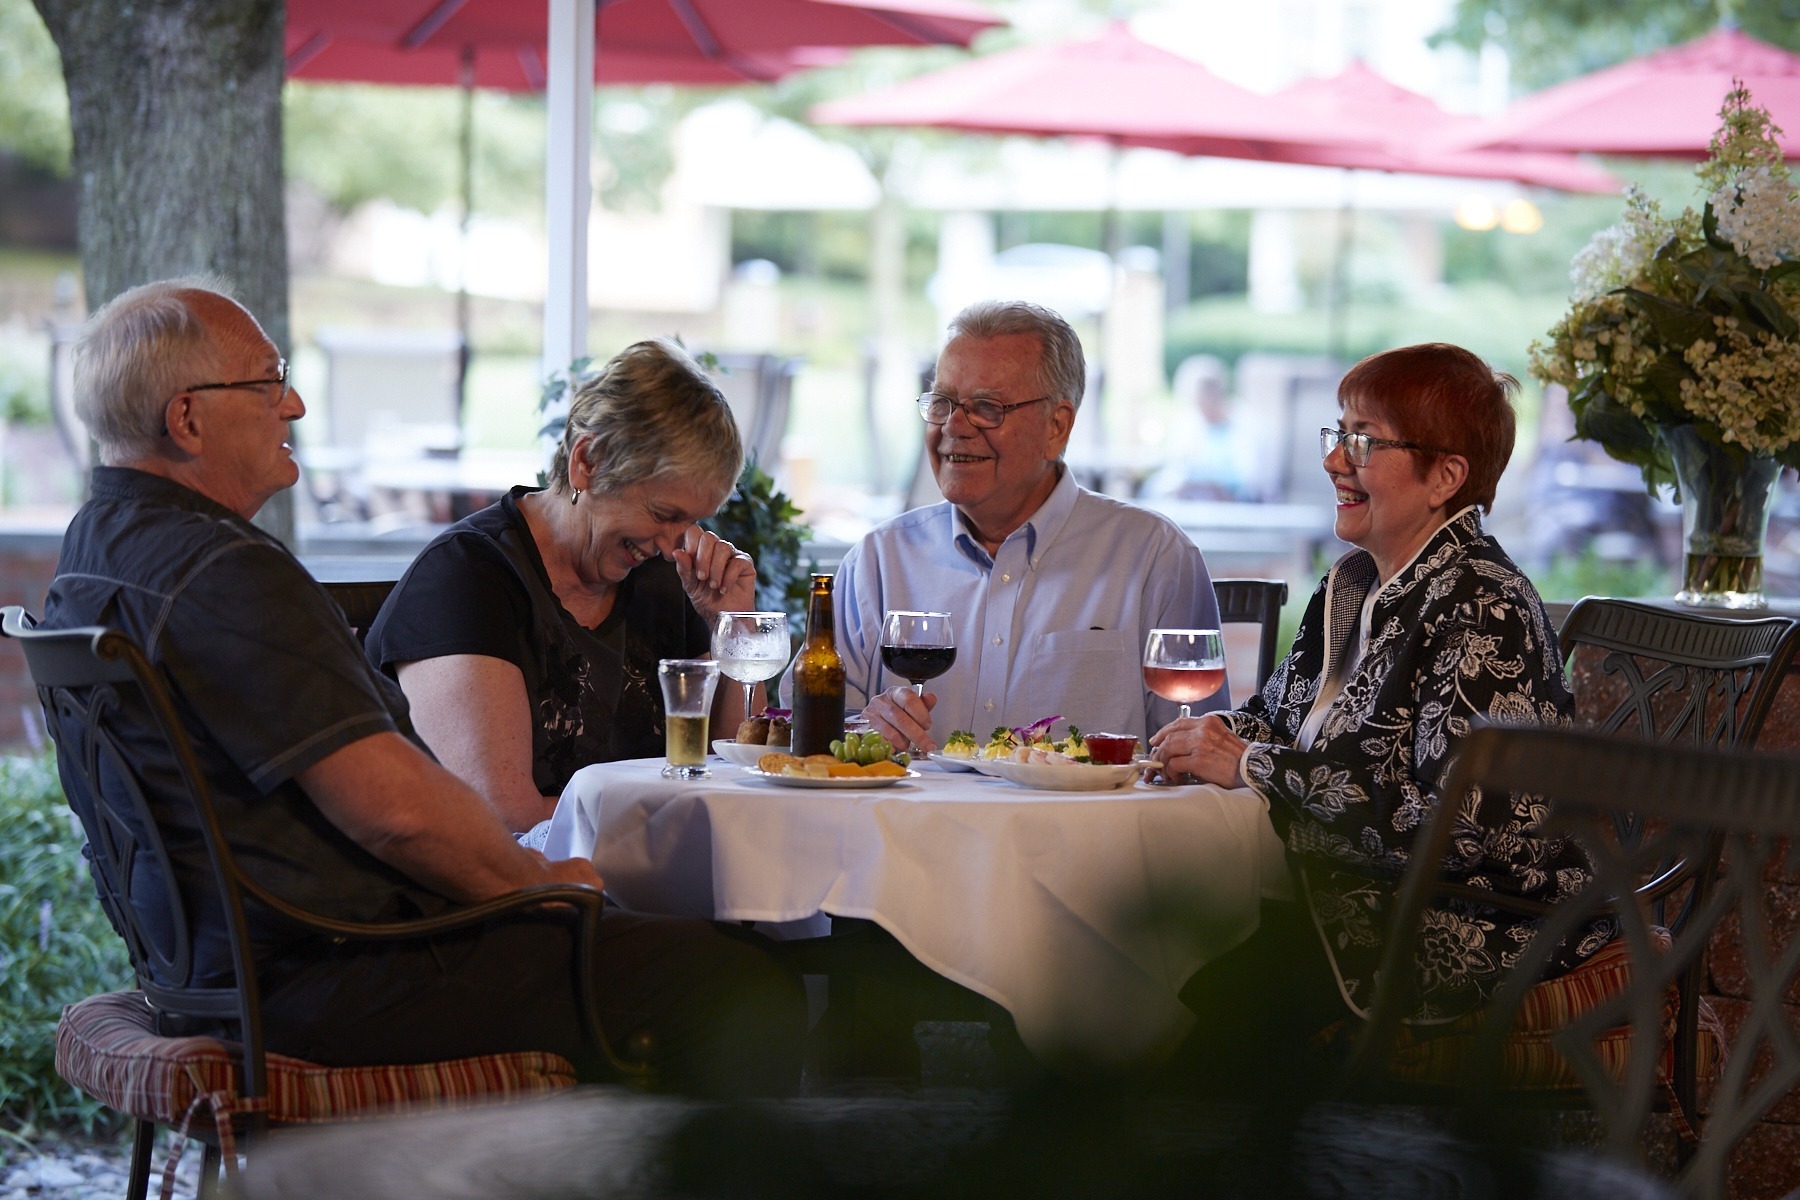 people in a CCRC outdoor table laughing over wine unlike assisted living communities